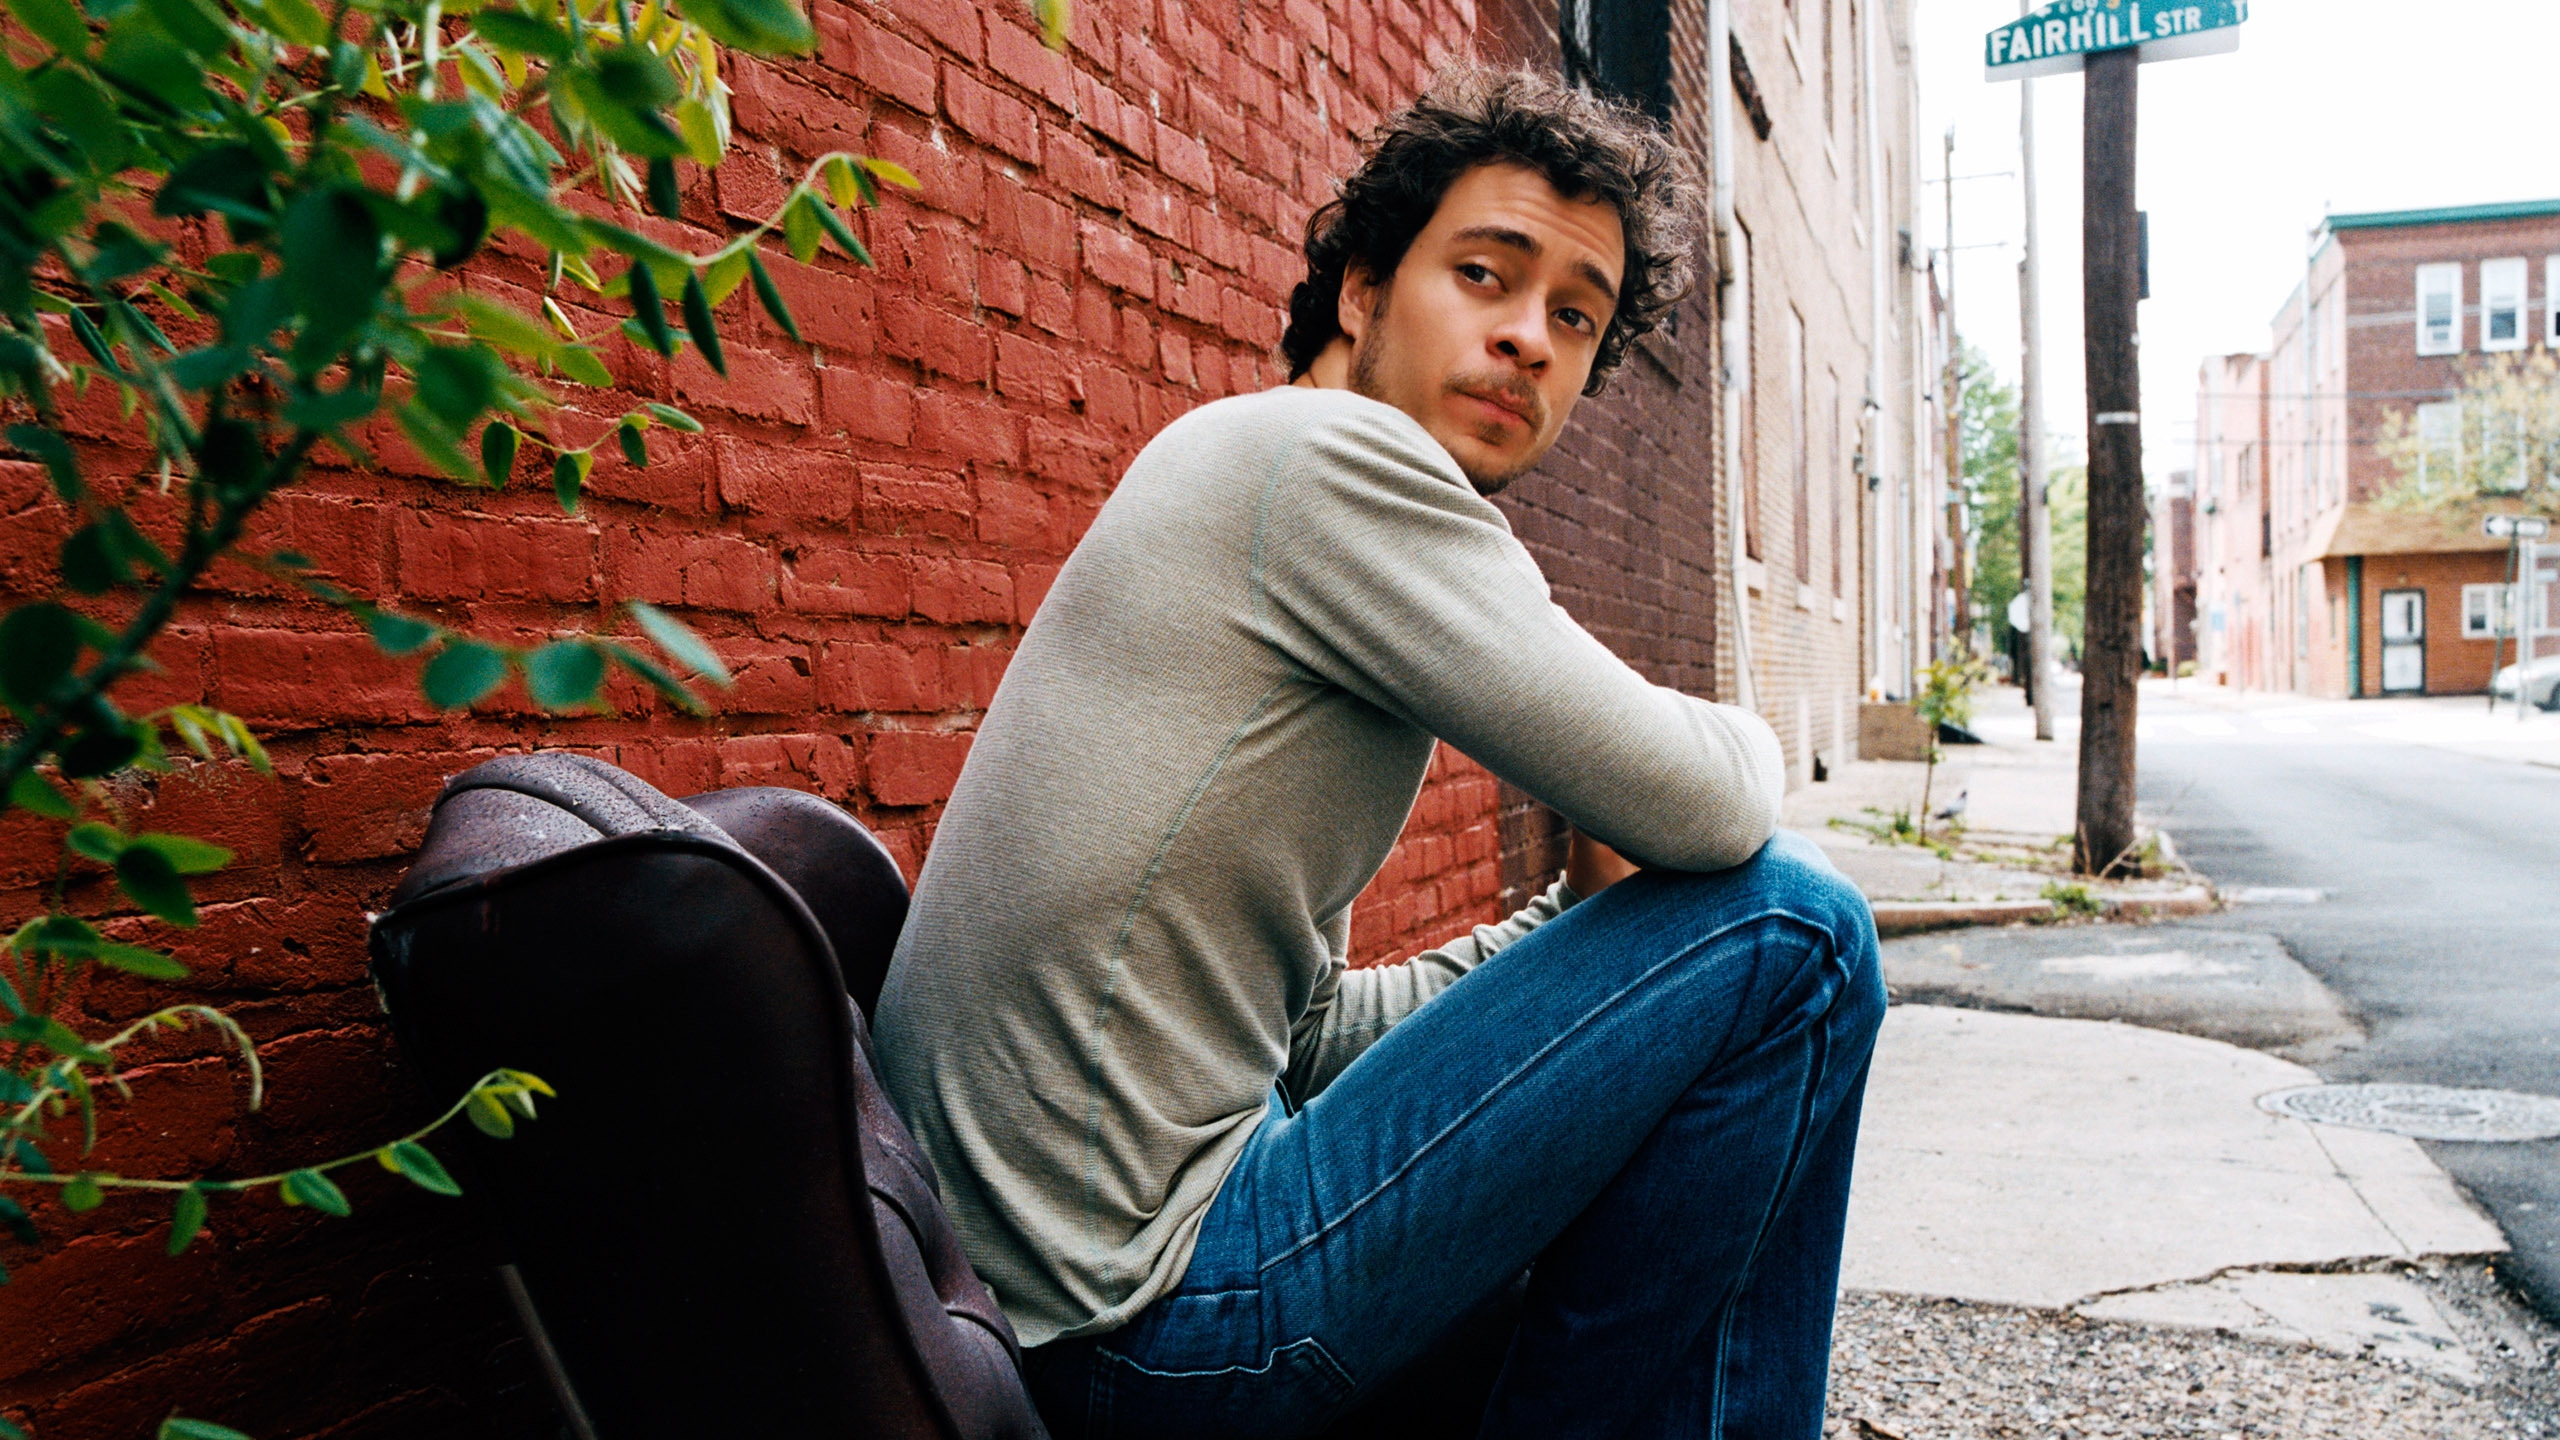 Cool Amos Lee for 2560x1440 HDTV resolution